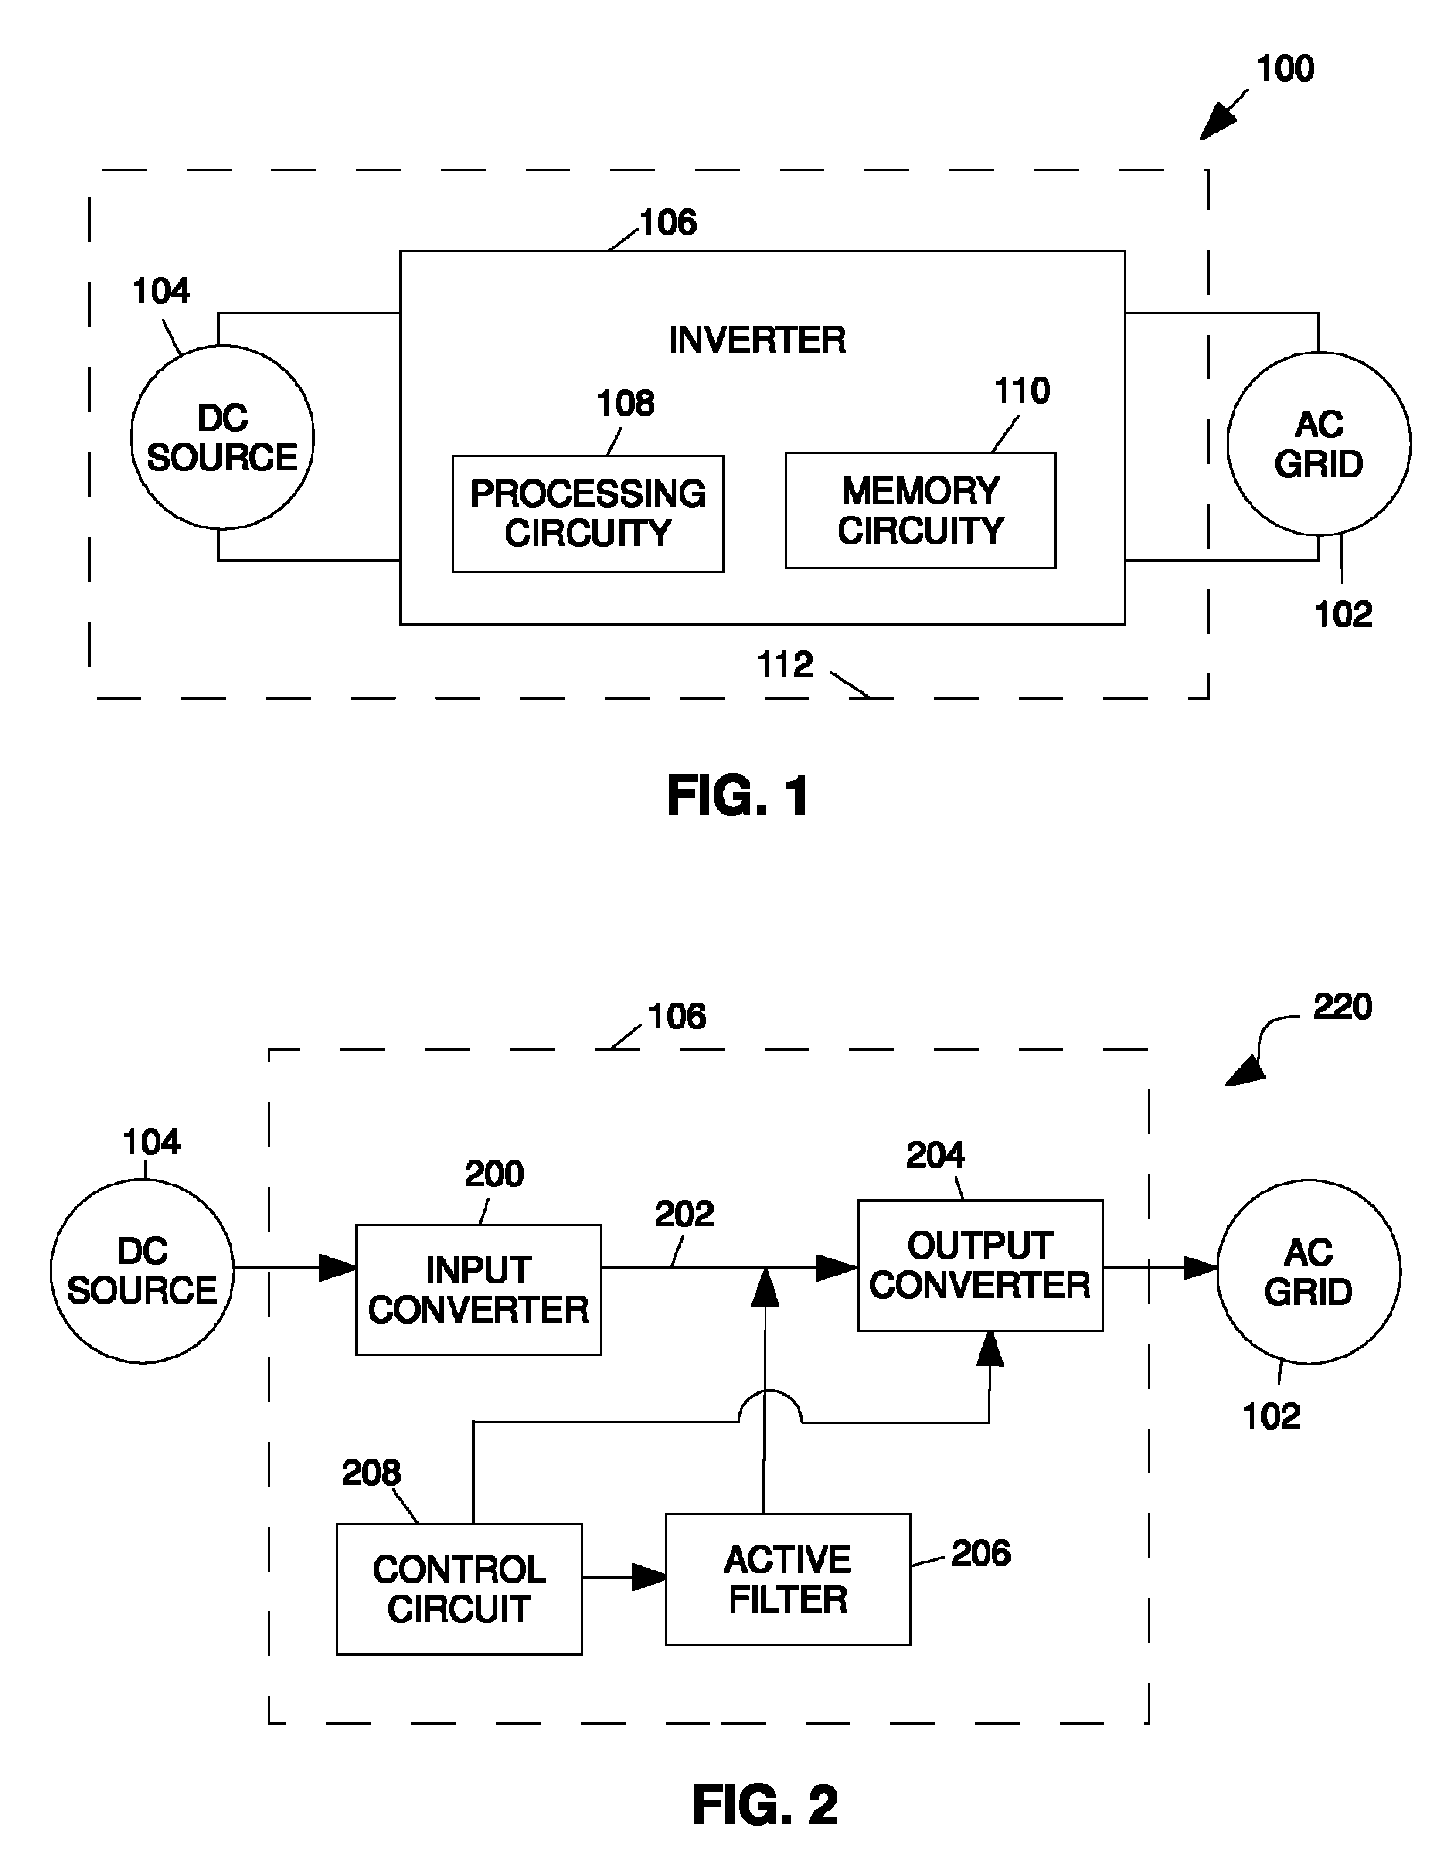 Power converter bus control method, system, and article of manufacture